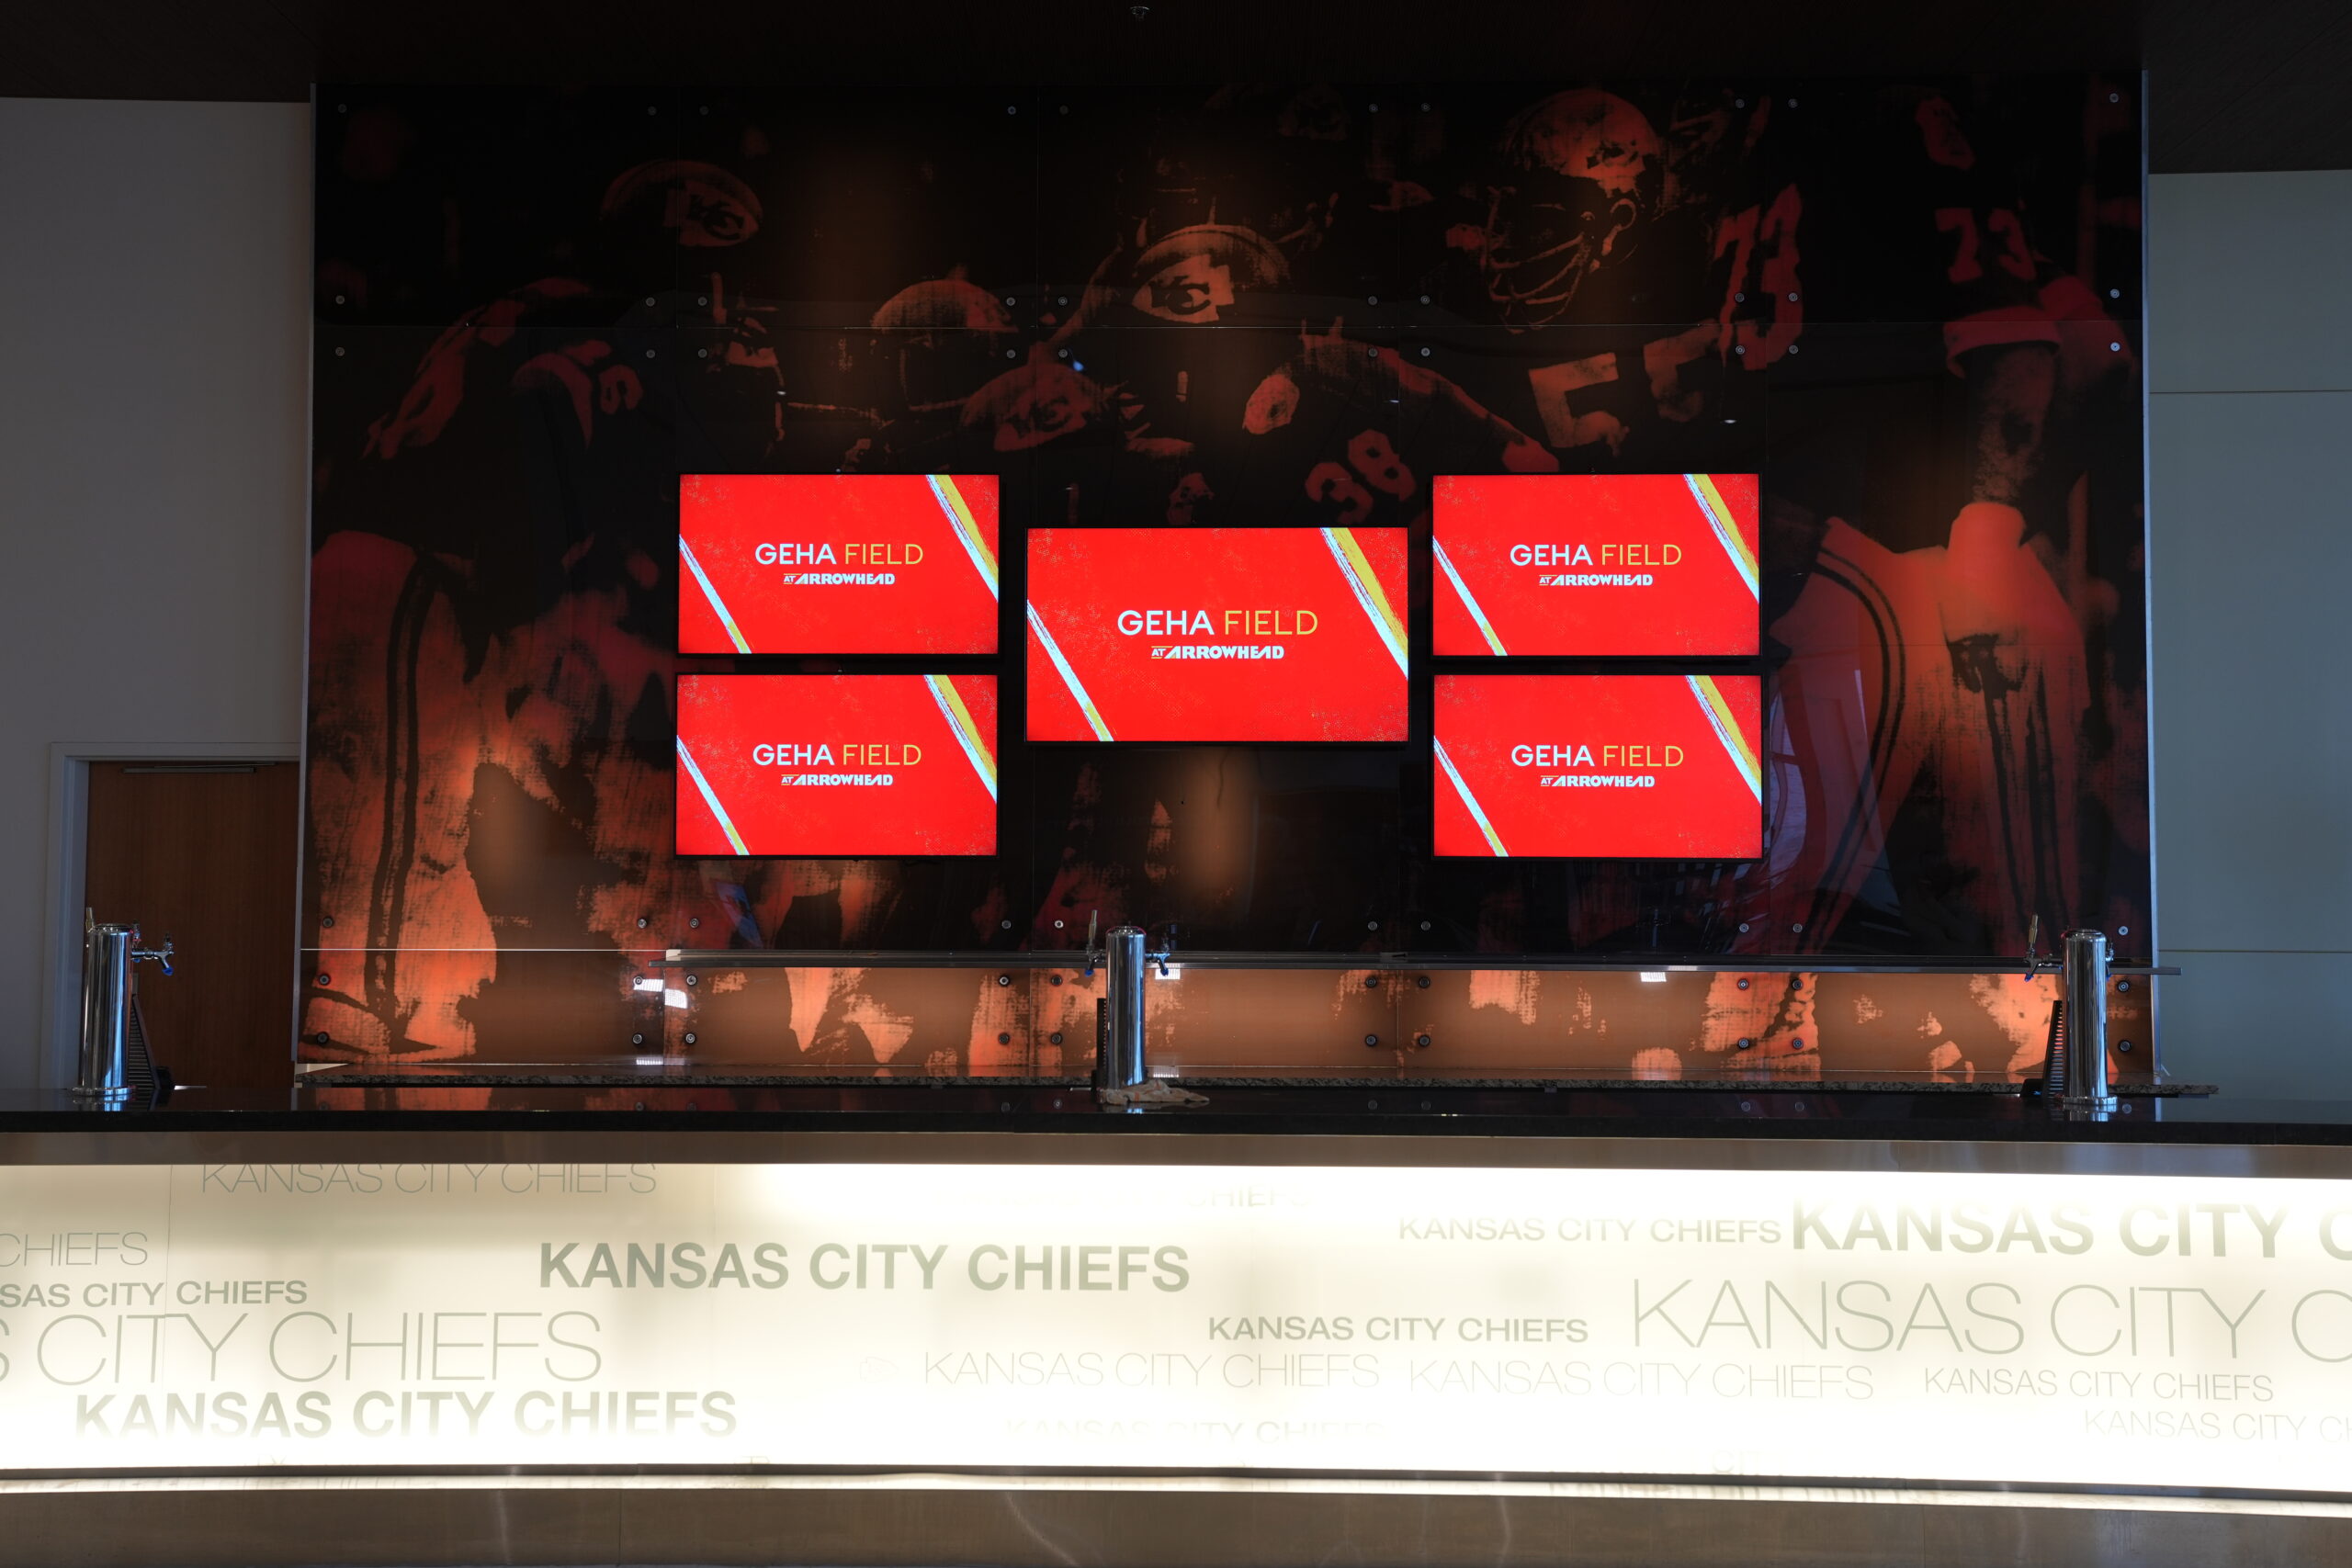 Sony’s Display Technology Scores Extra Points in the Kansas City Chiefs